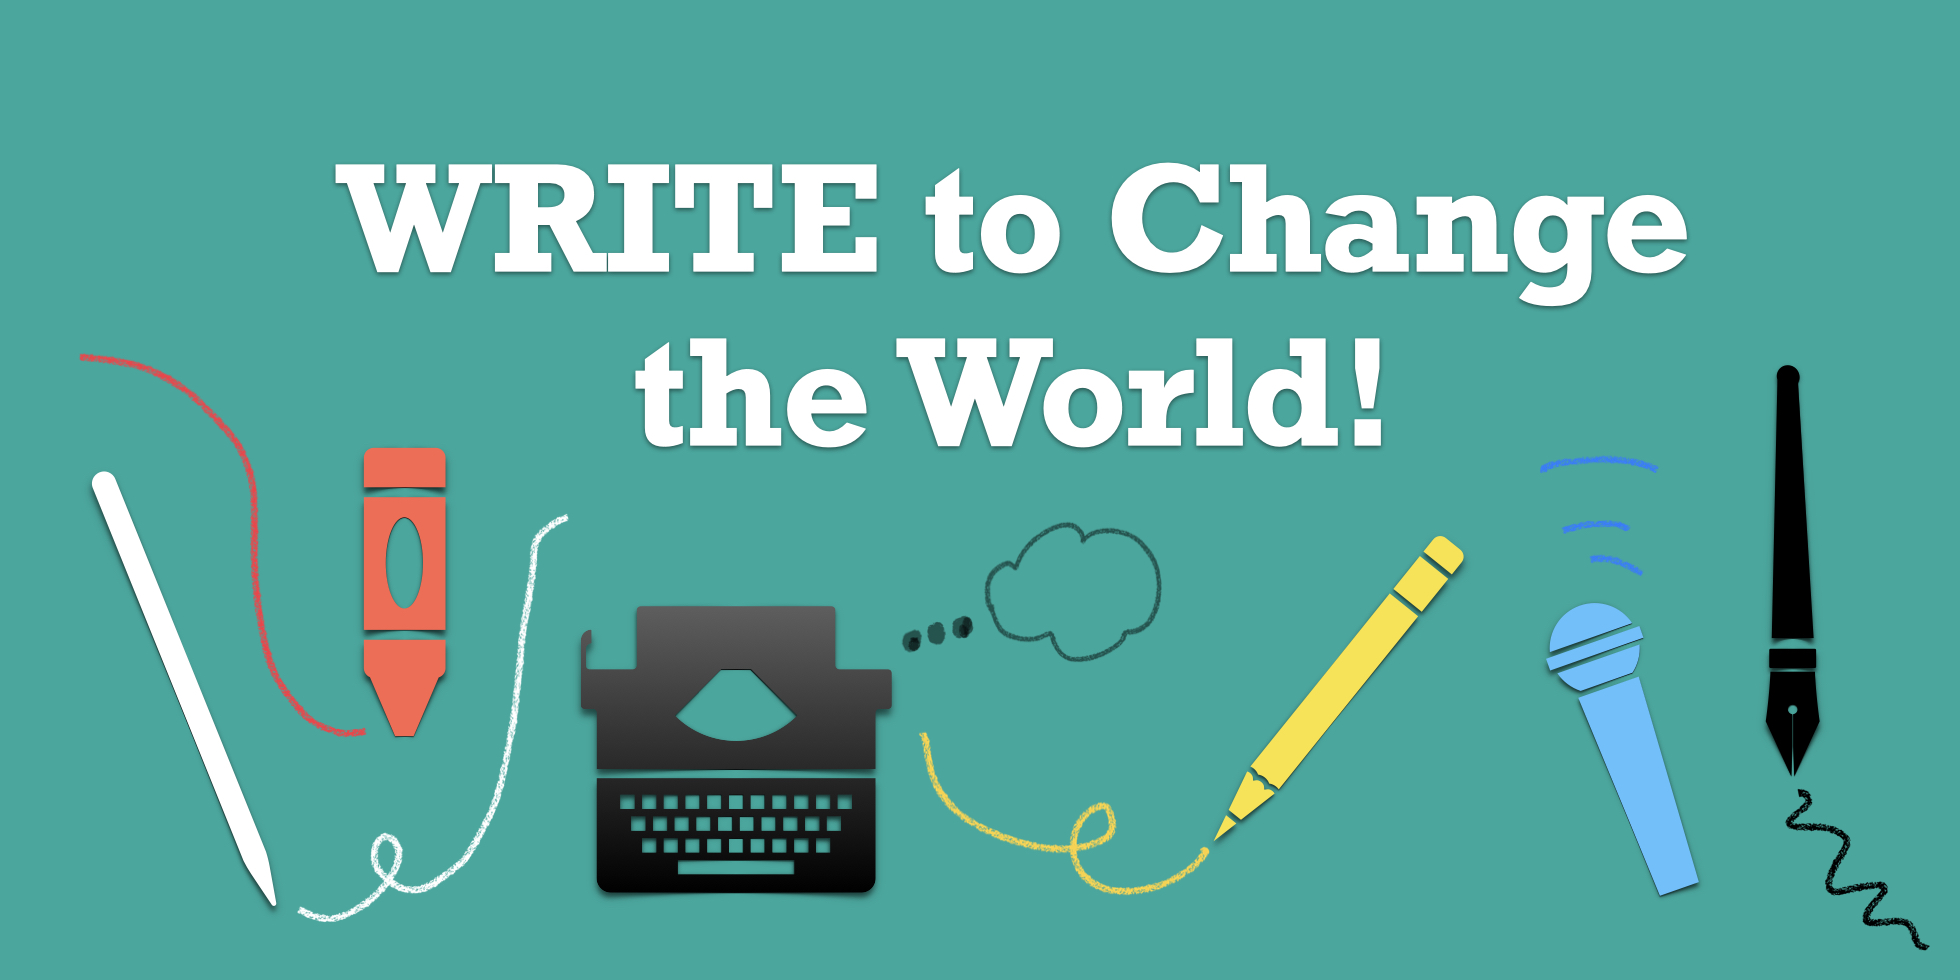 Featured image graphic for "Write to Change the World" CBL Challenge.